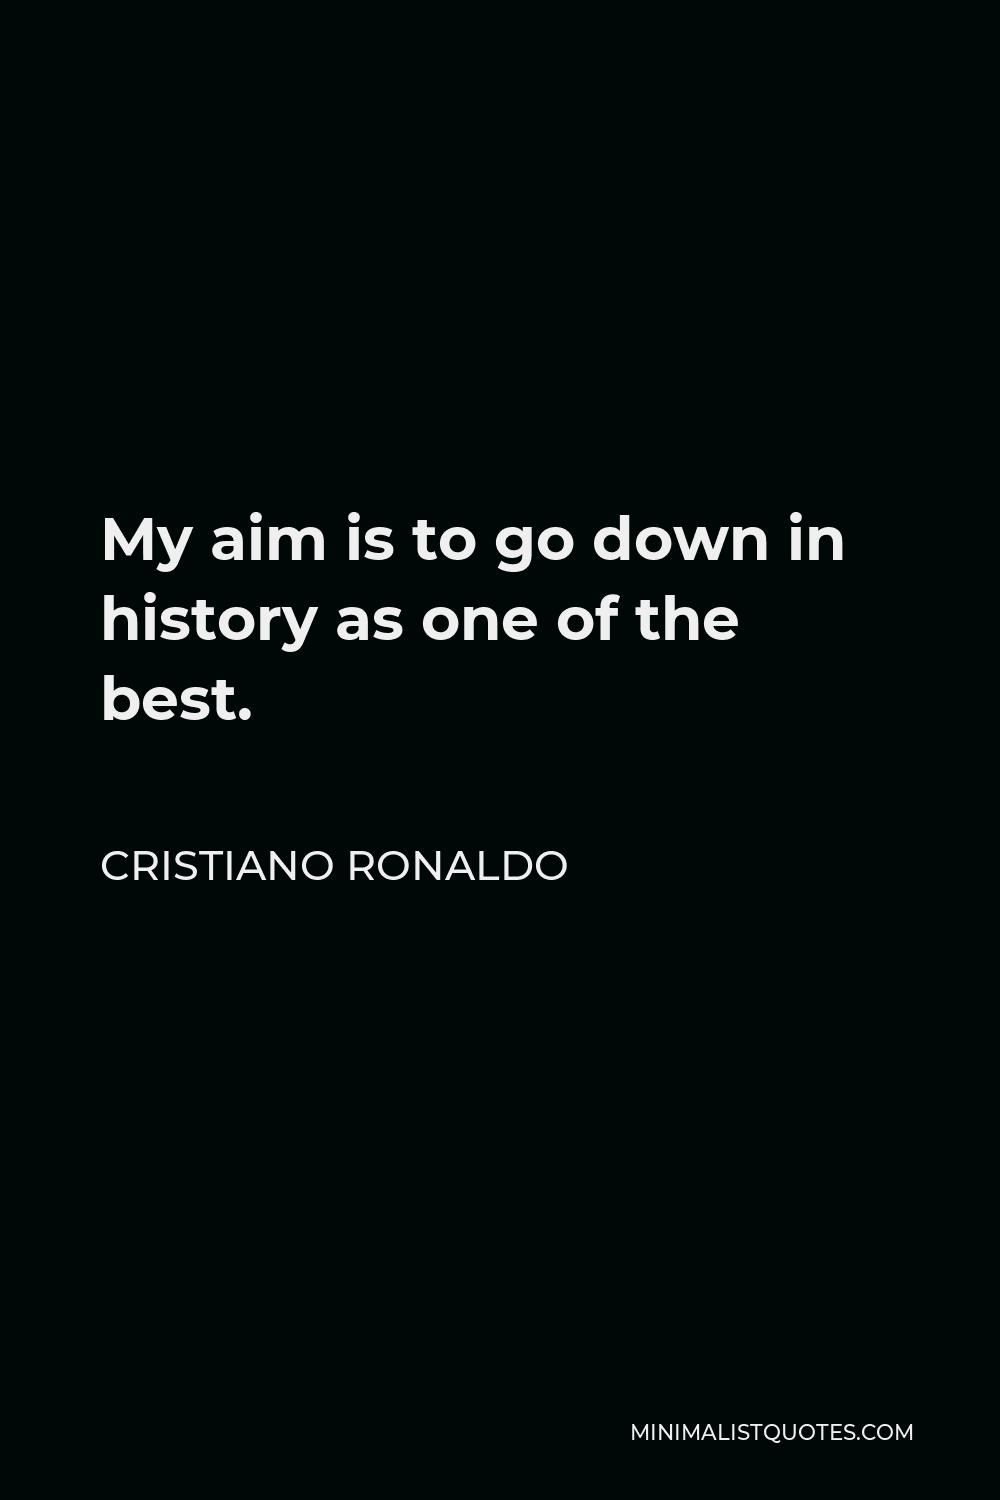 Cristiano Ronaldo Quote - My aim is to go down in history as one of the best.